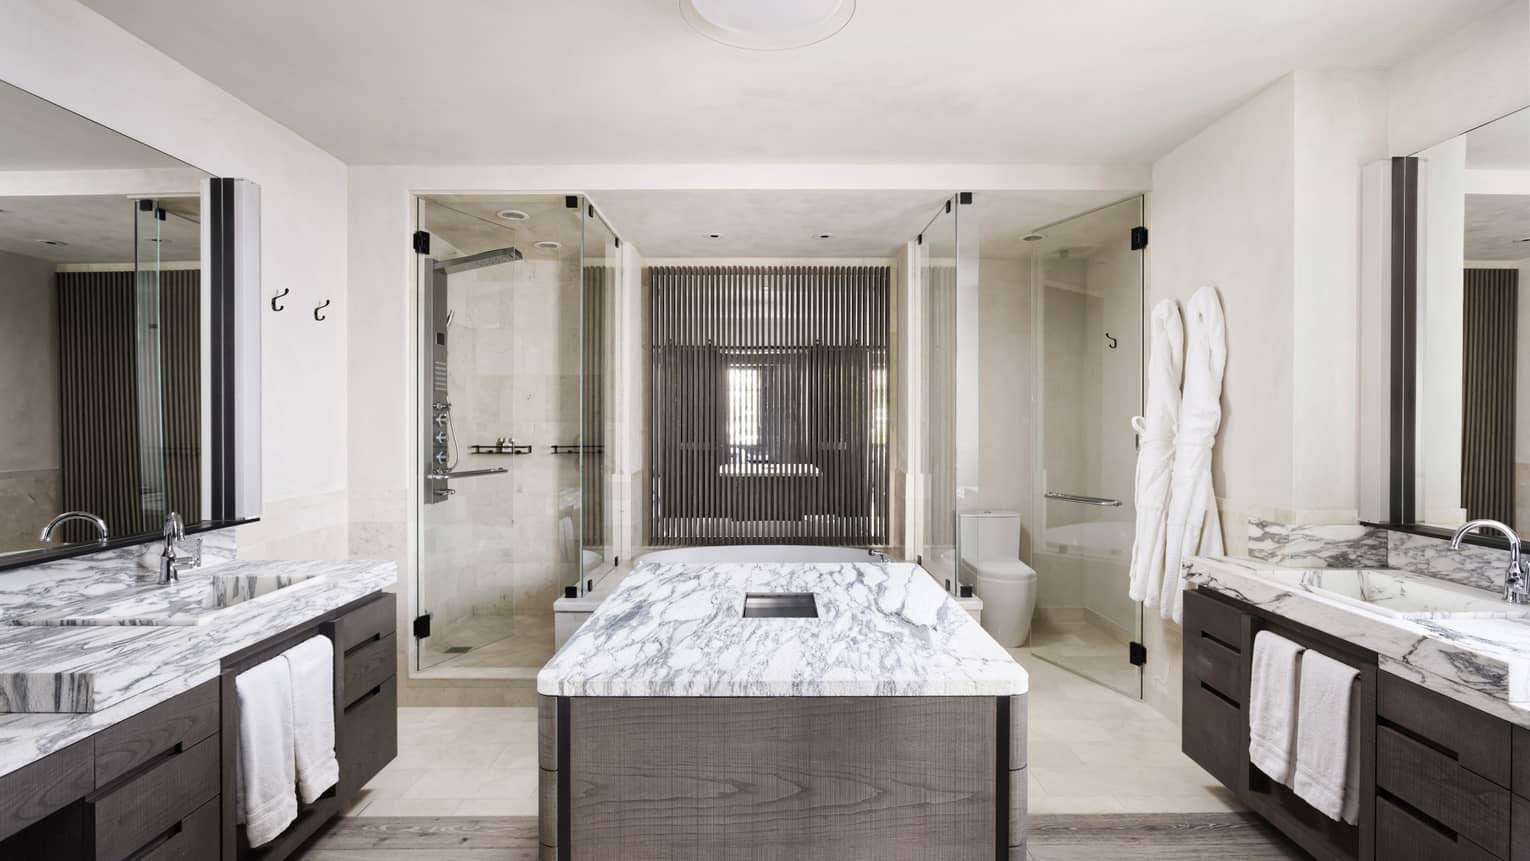 Large bathroom with his and hers double vanities